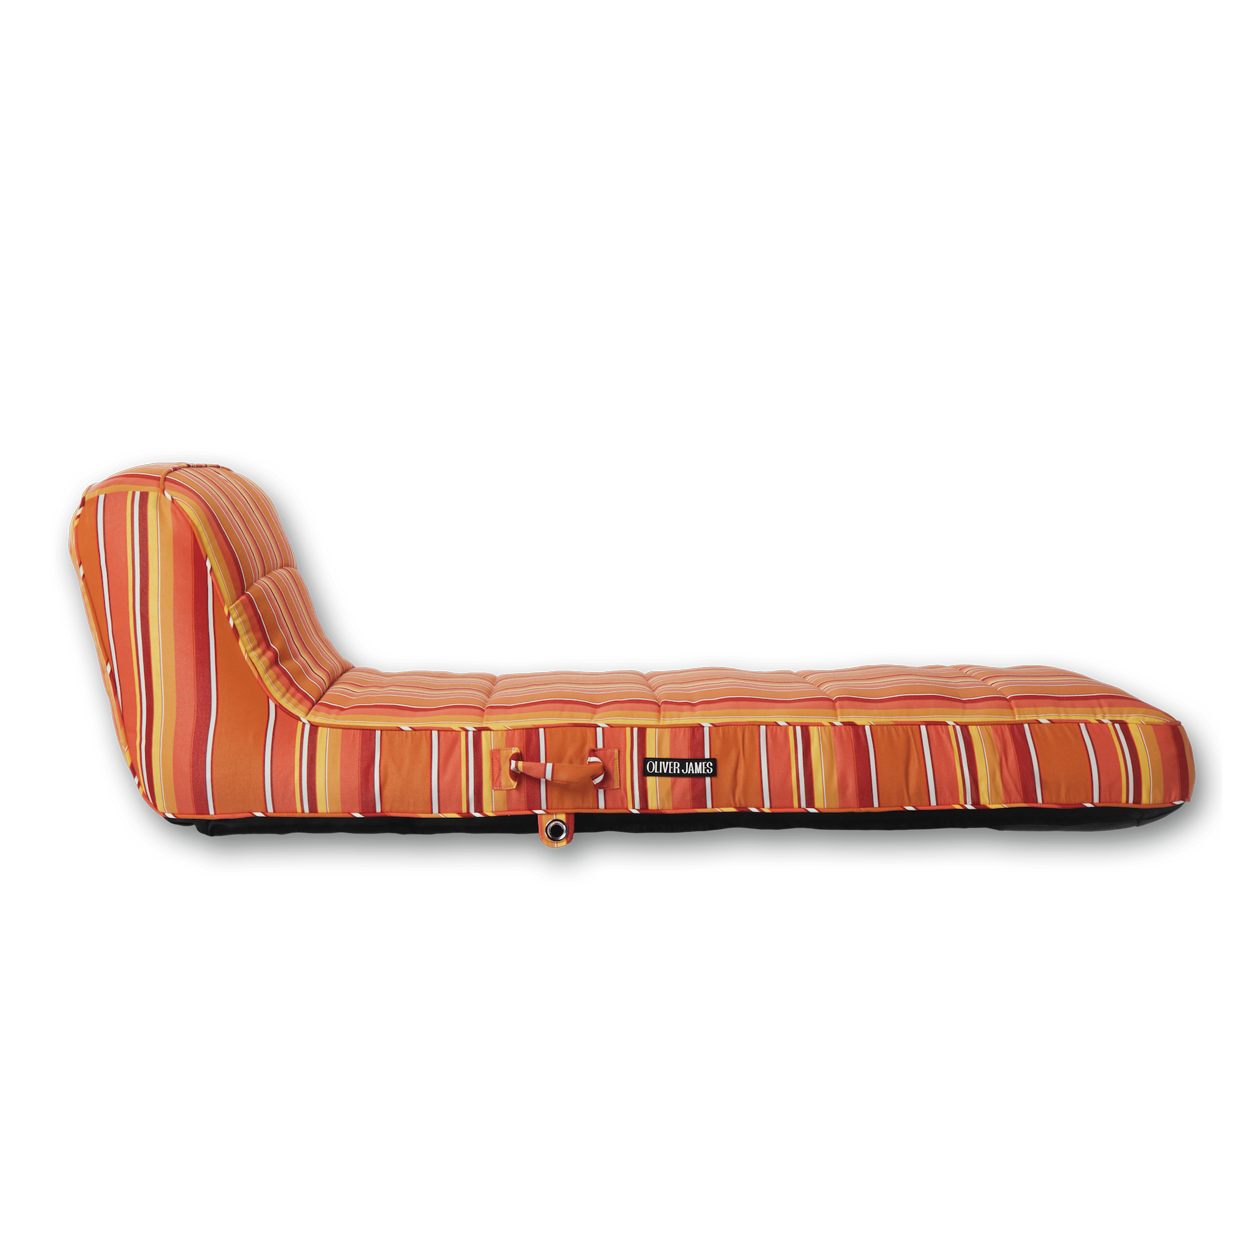 The side profile and backrest angle of a single orange and white striped luxury pool float.